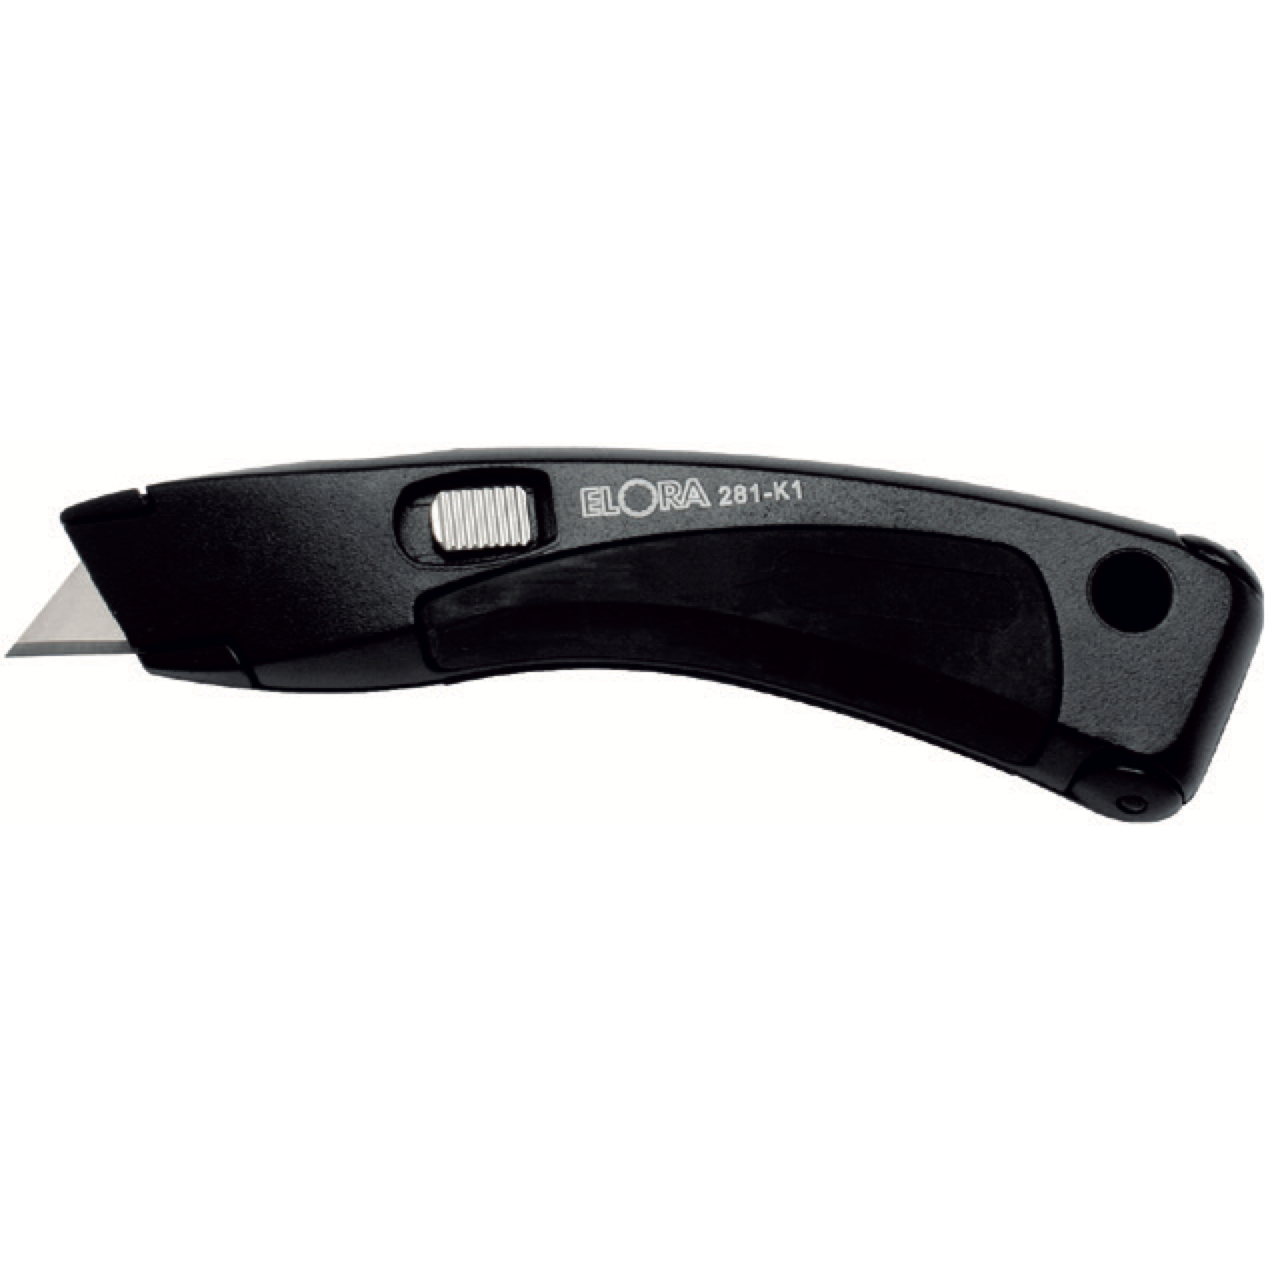 ELORA 281-K1 Safety Knife With Holster (ELORA Tools) - Premium Safety Knife from ELORA - Shop now at Yew Aik.